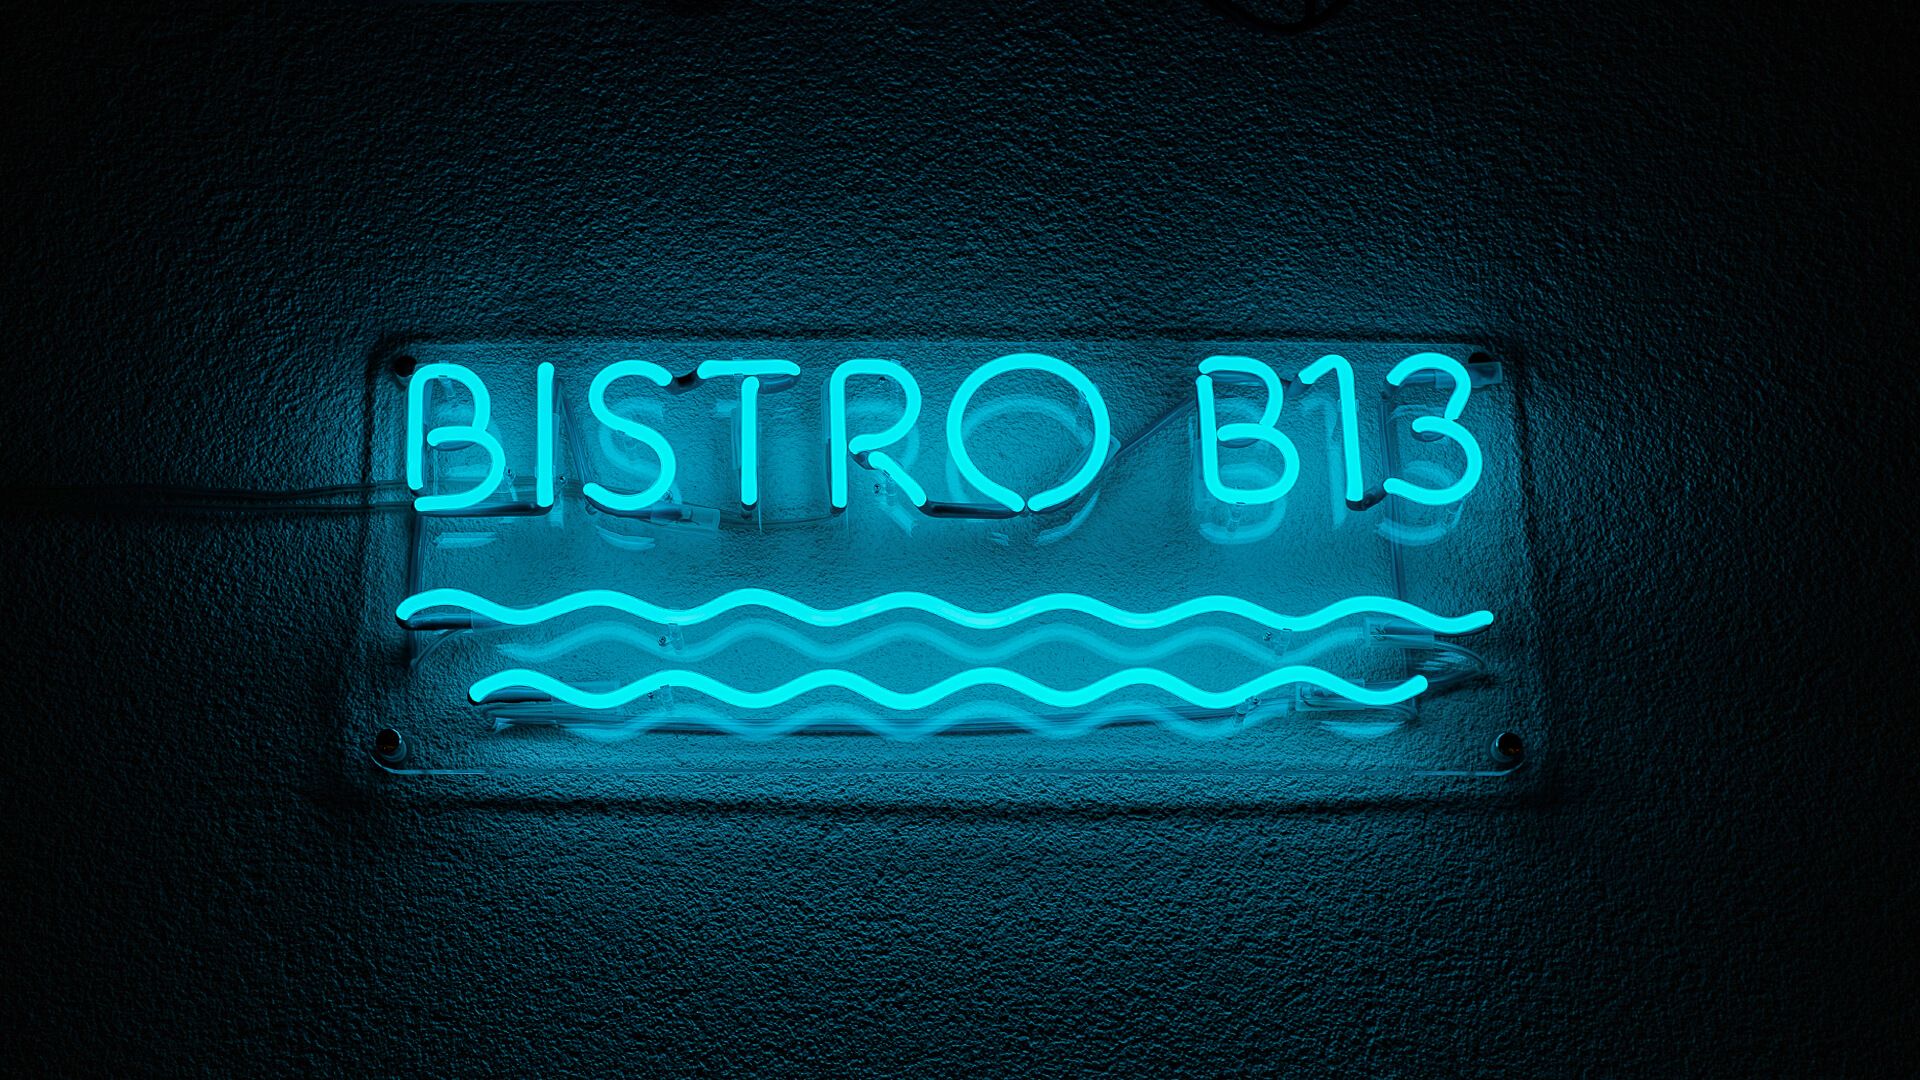 Bistro B13 - Blue neon Bistro, with waves under the lettering.